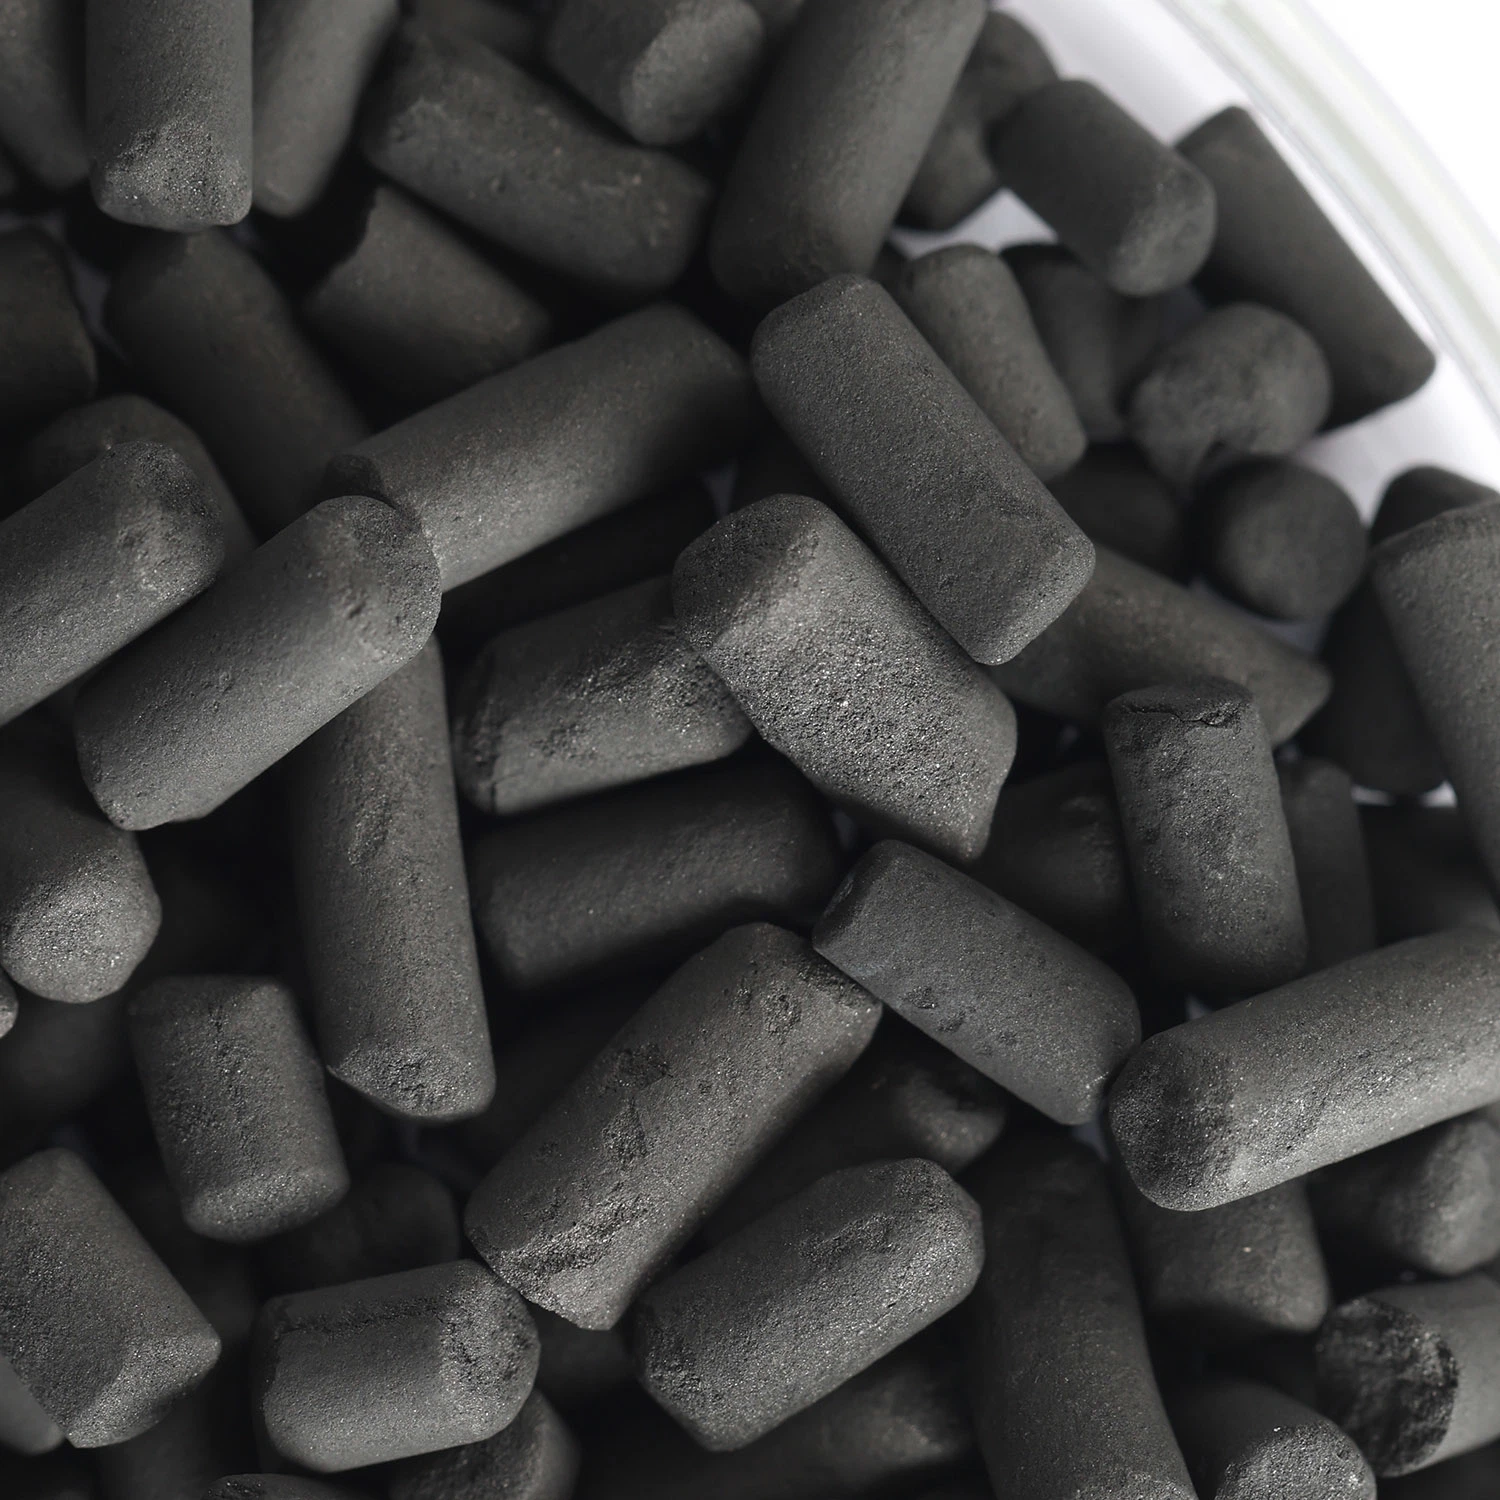 1050 G Per Mg Iodine Value Black Coal Columnar Activated Carbon Applied in The Field of Gas Purification